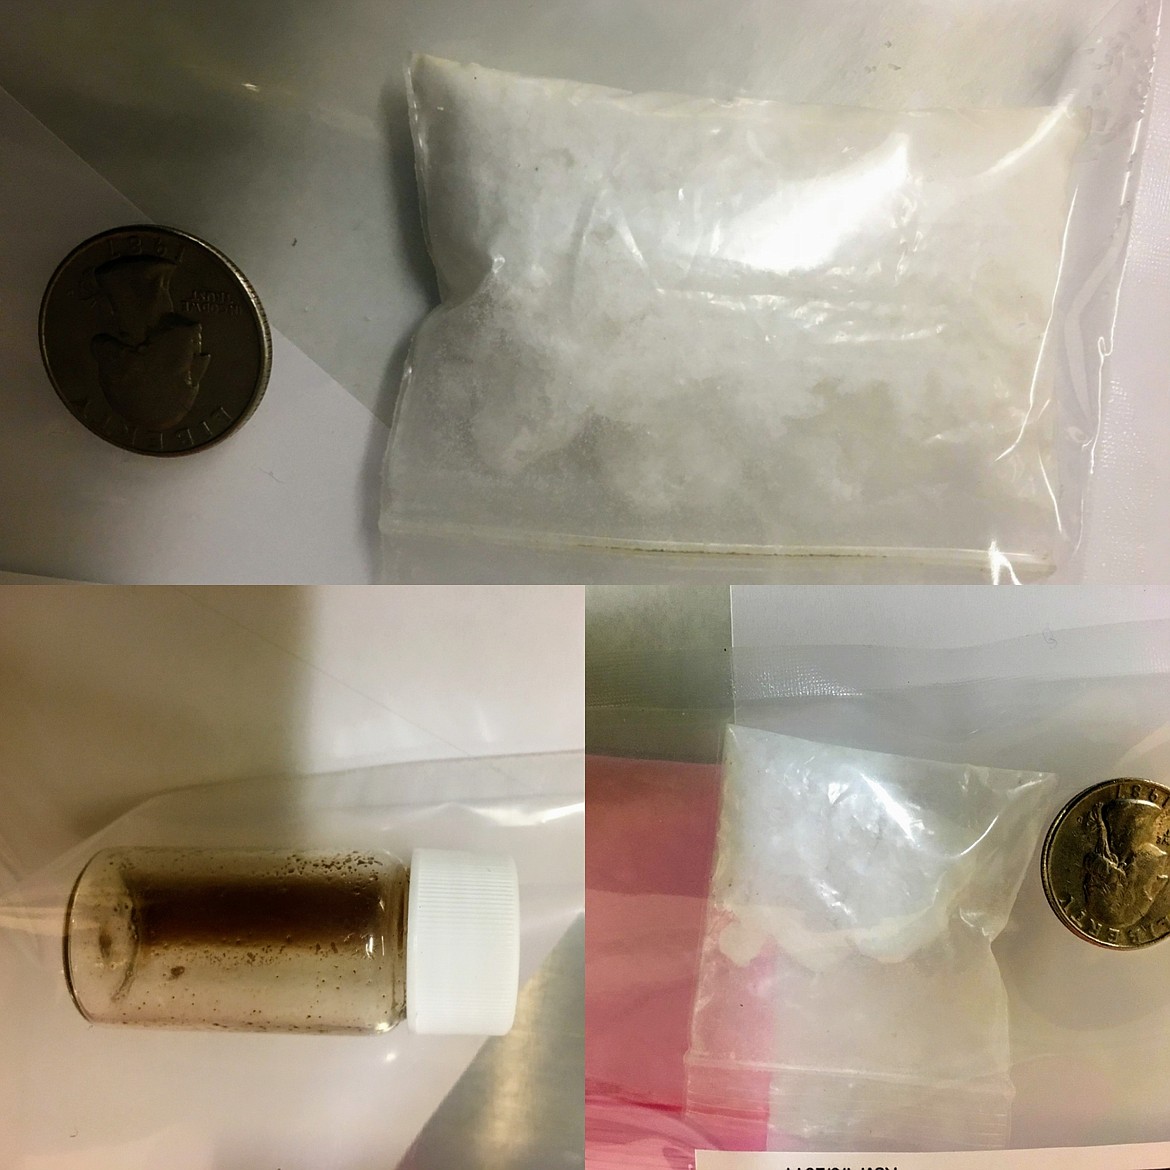 (Top) The largest single seizure of crystal meth from the operation, weighing in at just under an ounce. (Bottom left) An amount of liquid meth. (Bottom right) Another smaller amount of crystal meth.